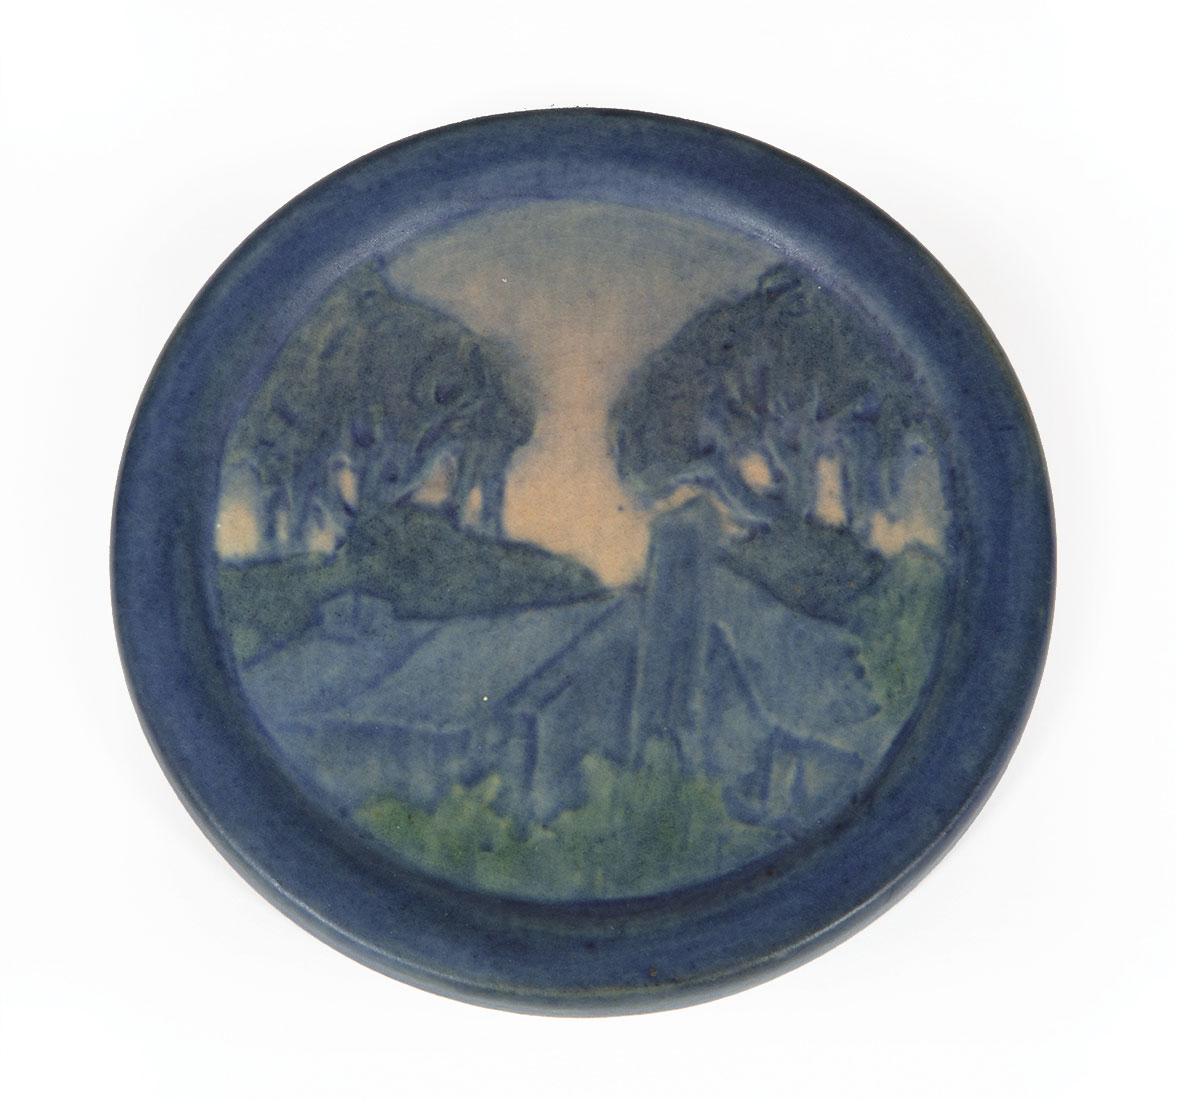 Newcomb College Art Pottery Plaque , decorated with low relief-carved cabin and trees design,